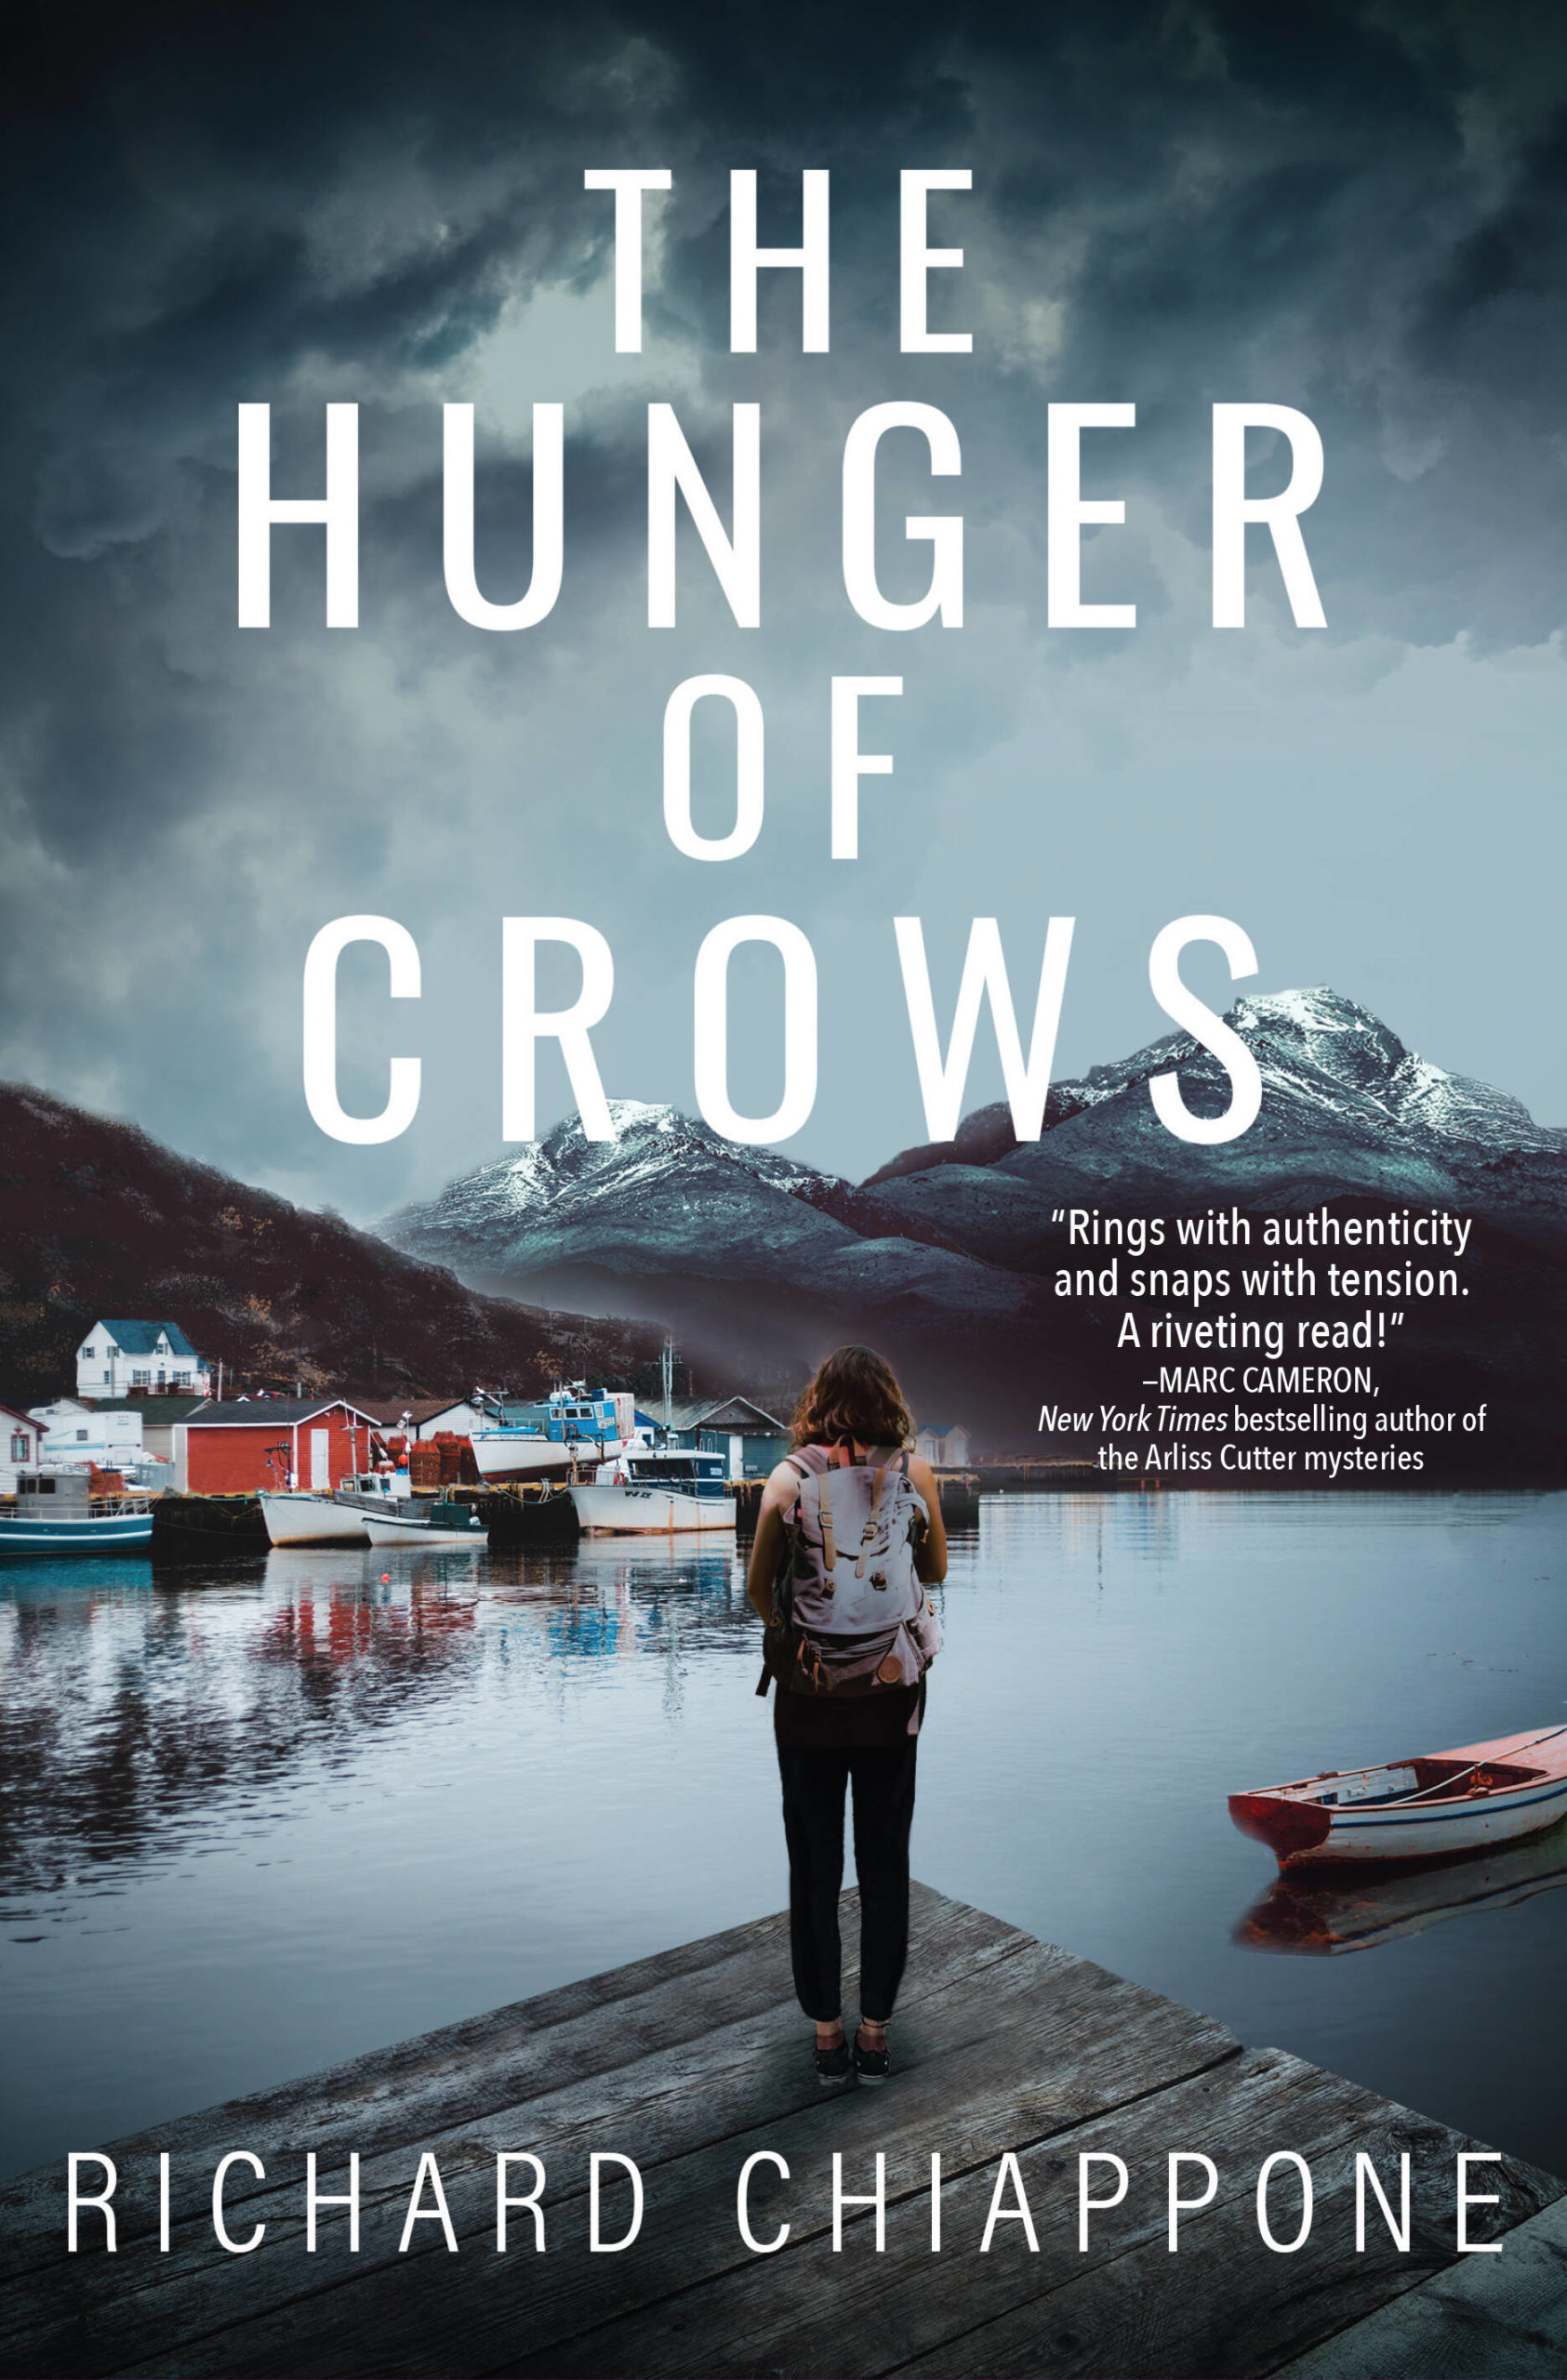 The cover of Richard Chiappone’s “The Hunger of Crows” (Crooked Lane Books, November 2021)